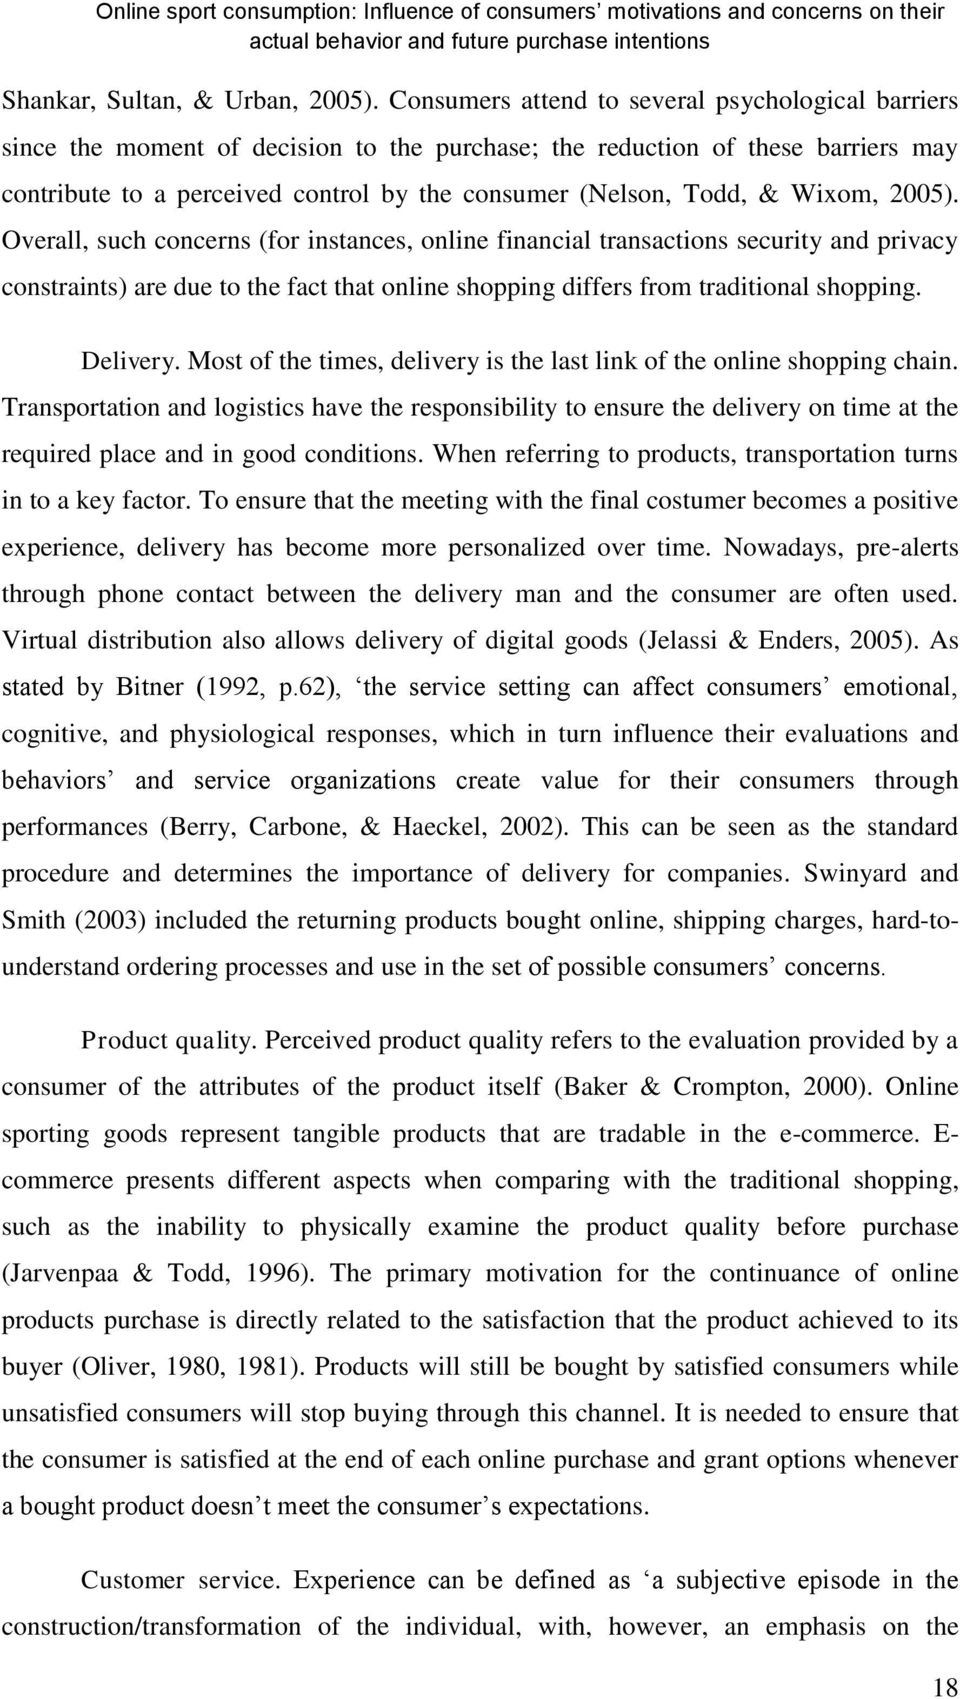 Wixom, 2005). Overall, such concerns (for instances, online financial transactions security and privacy constraints) are due to the fact that online shopping differs from traditional shopping.